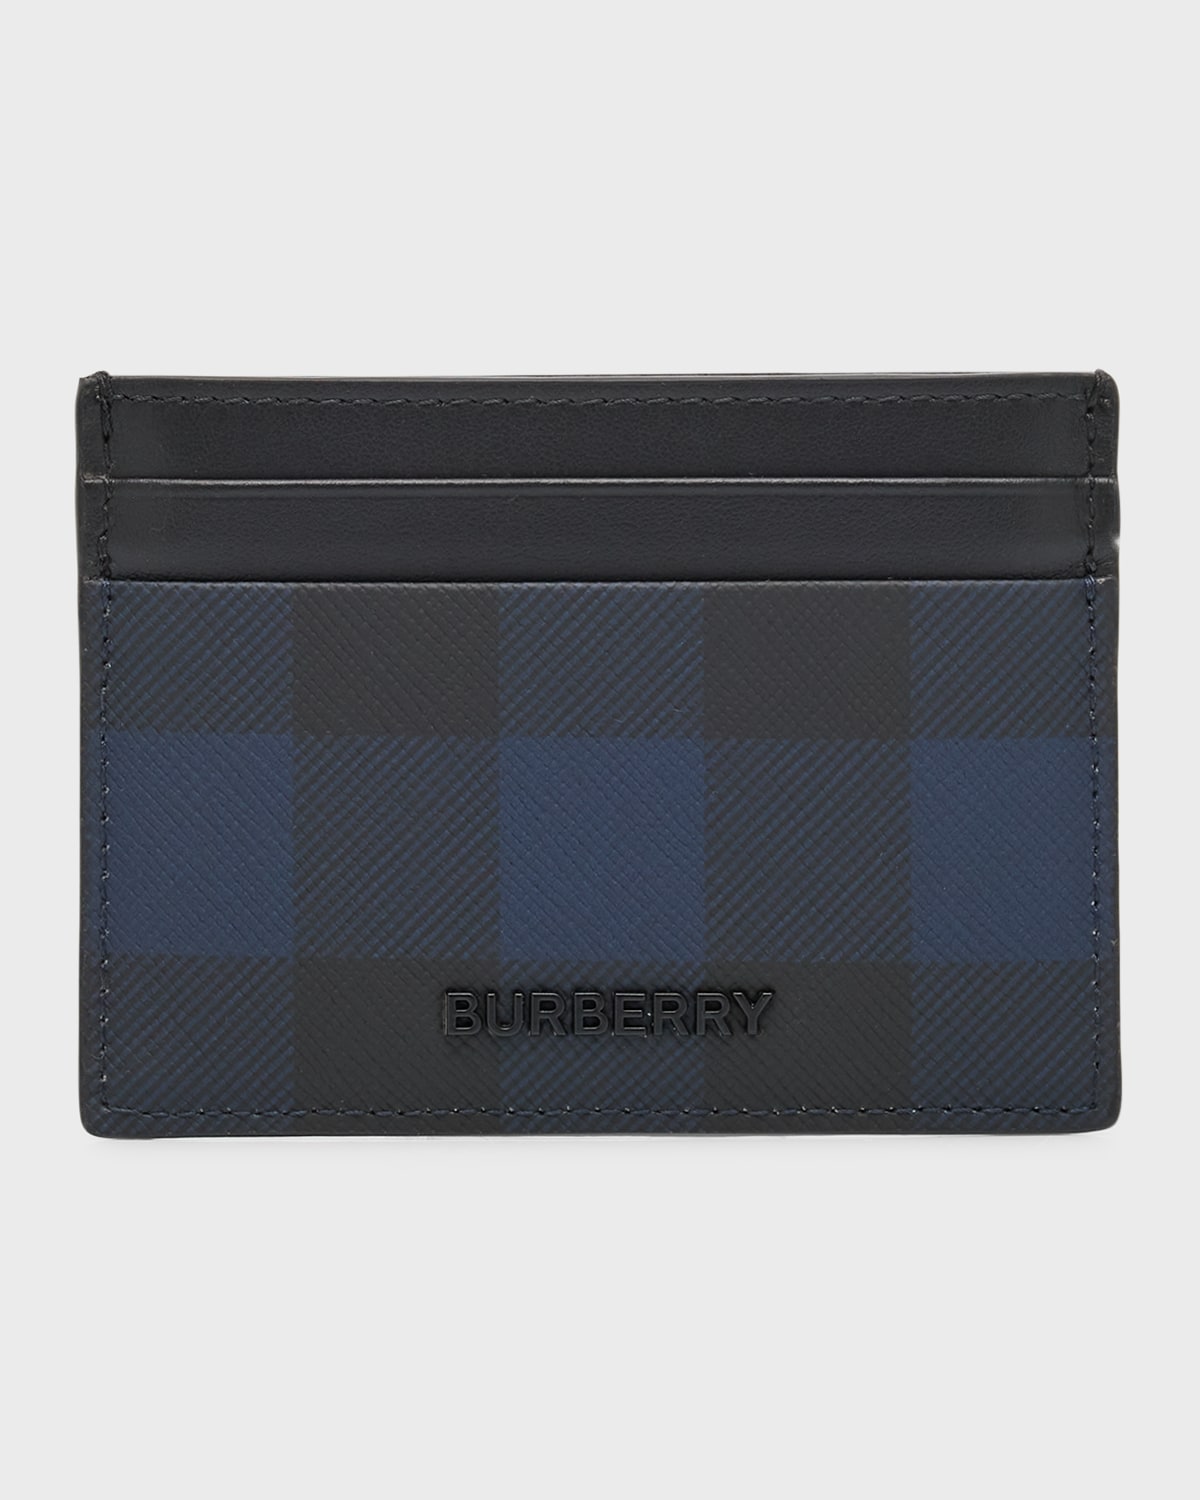 Burberry Men's Sandon Check And Leather Card Holder In Navy Check